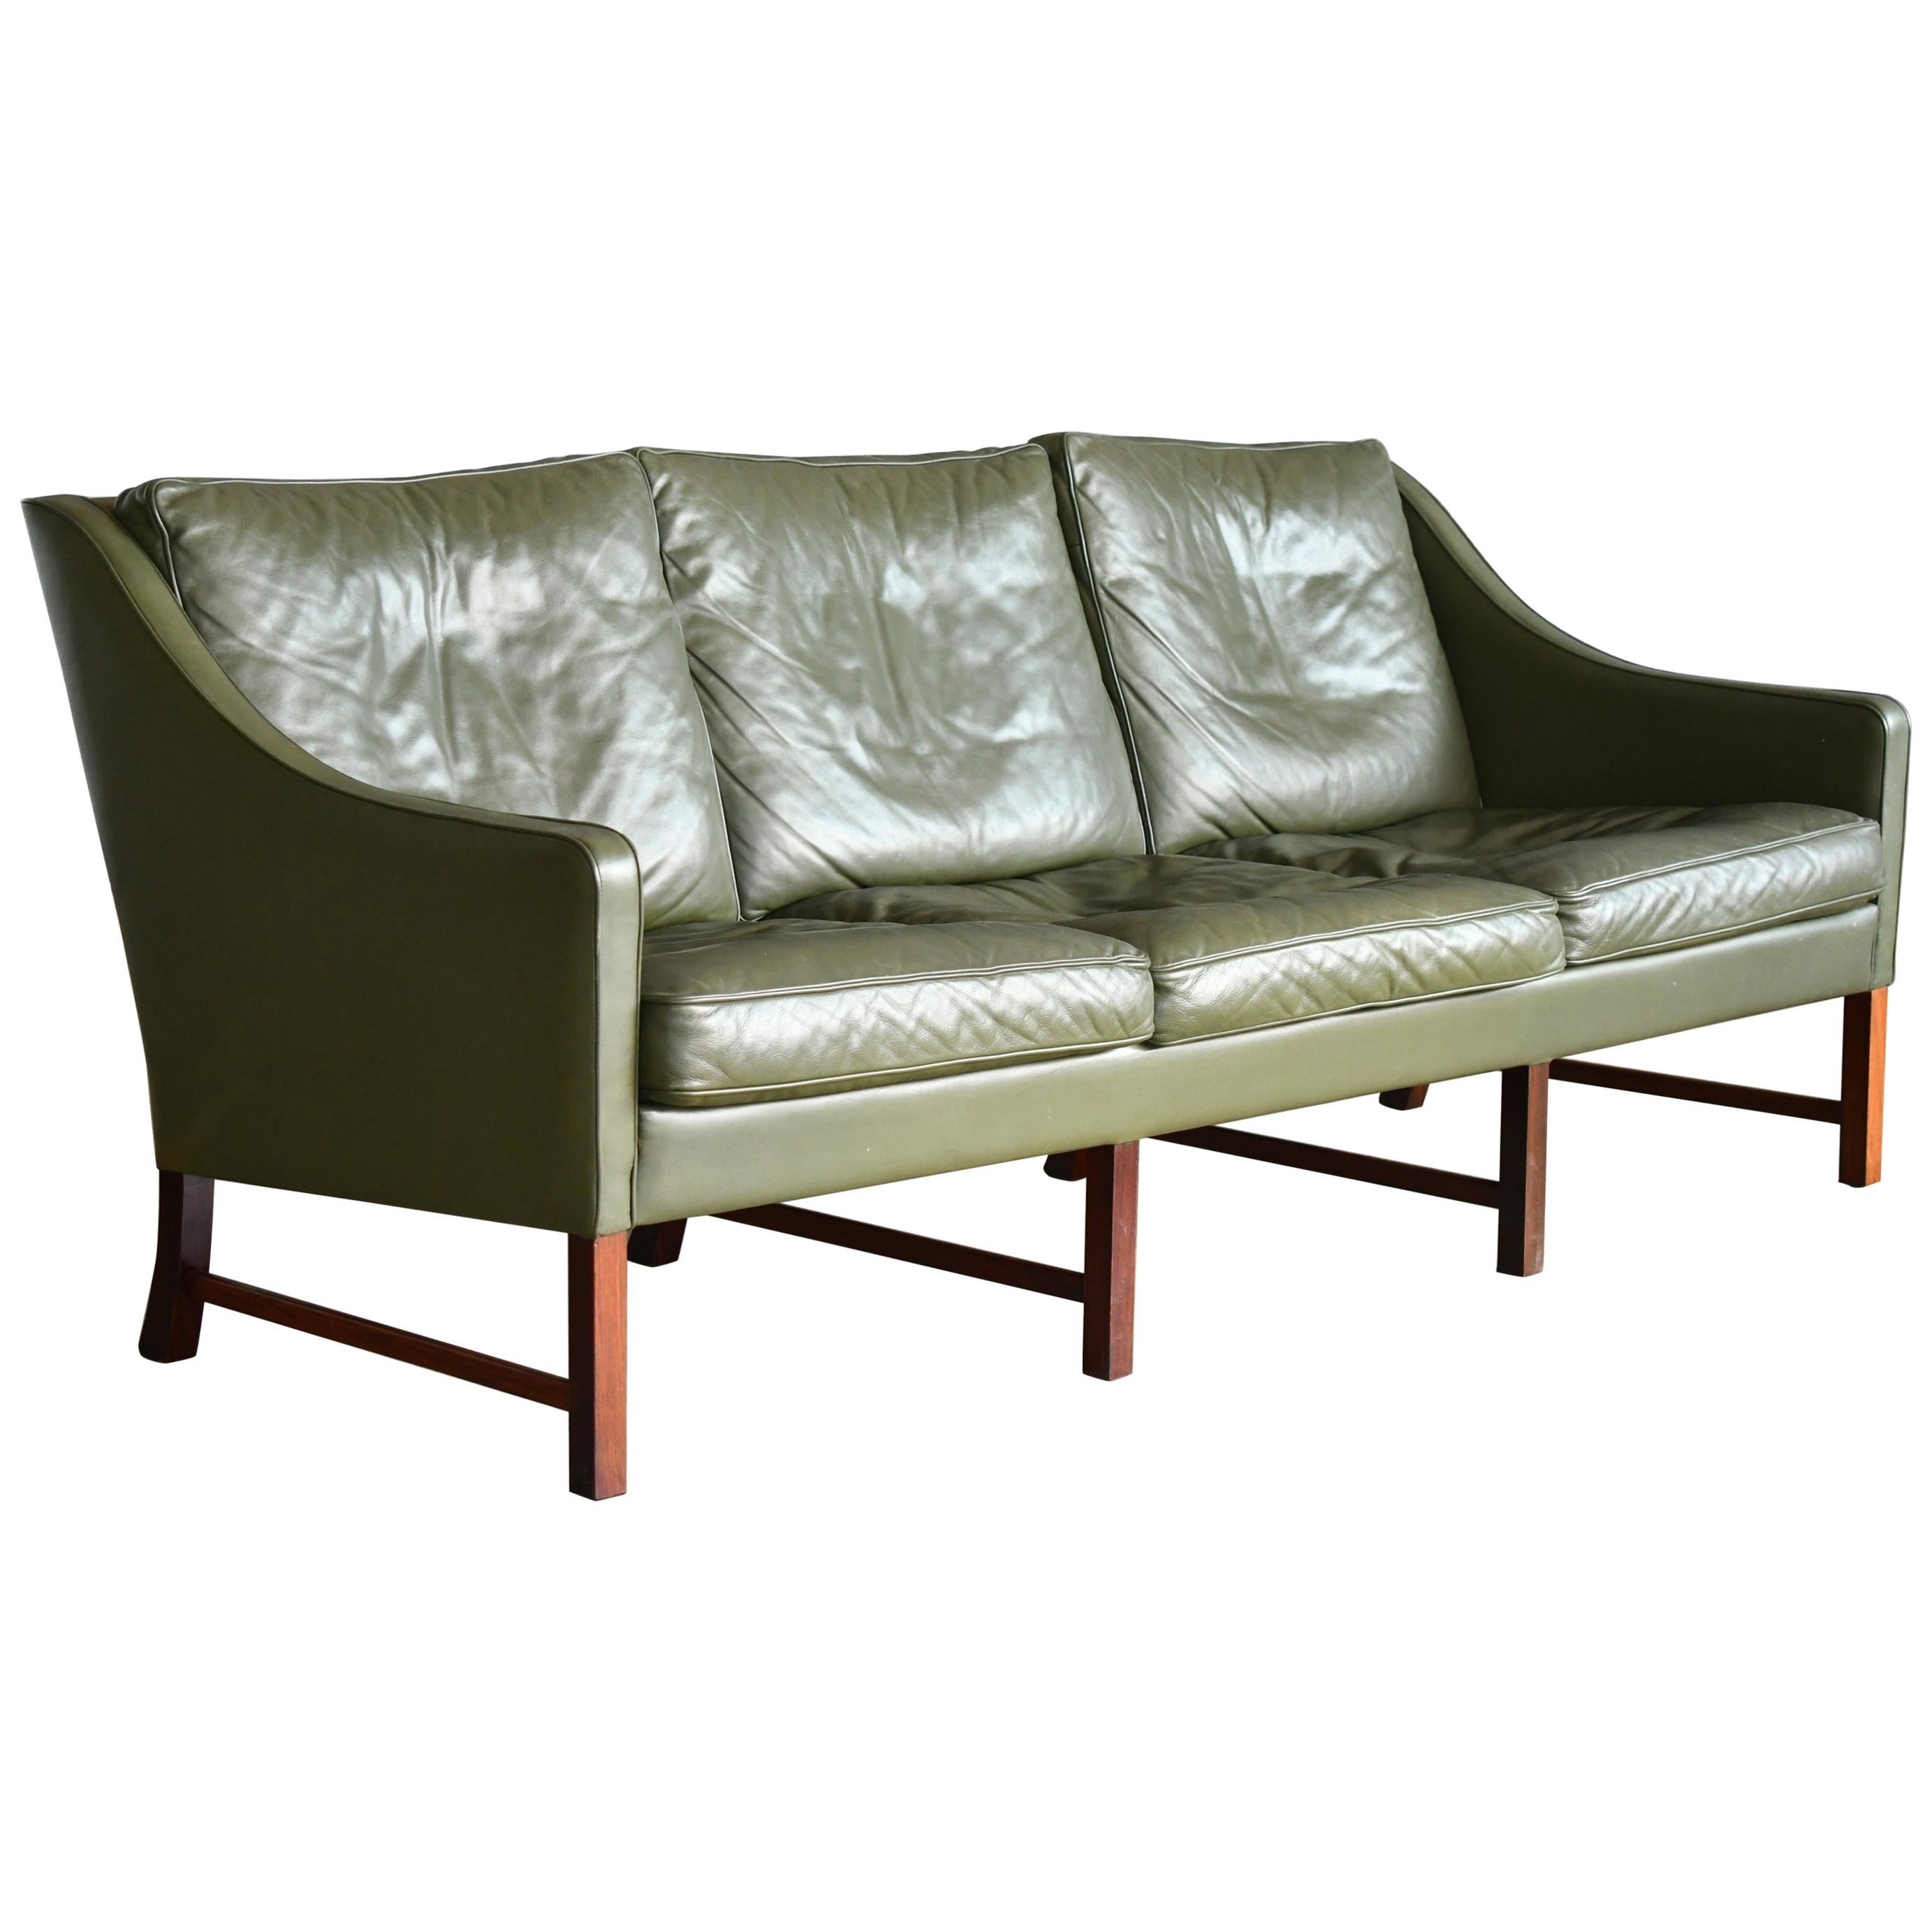 Three-Seat Sofa in Green Leather and Rosewood Attributed to Fredrik Kayser